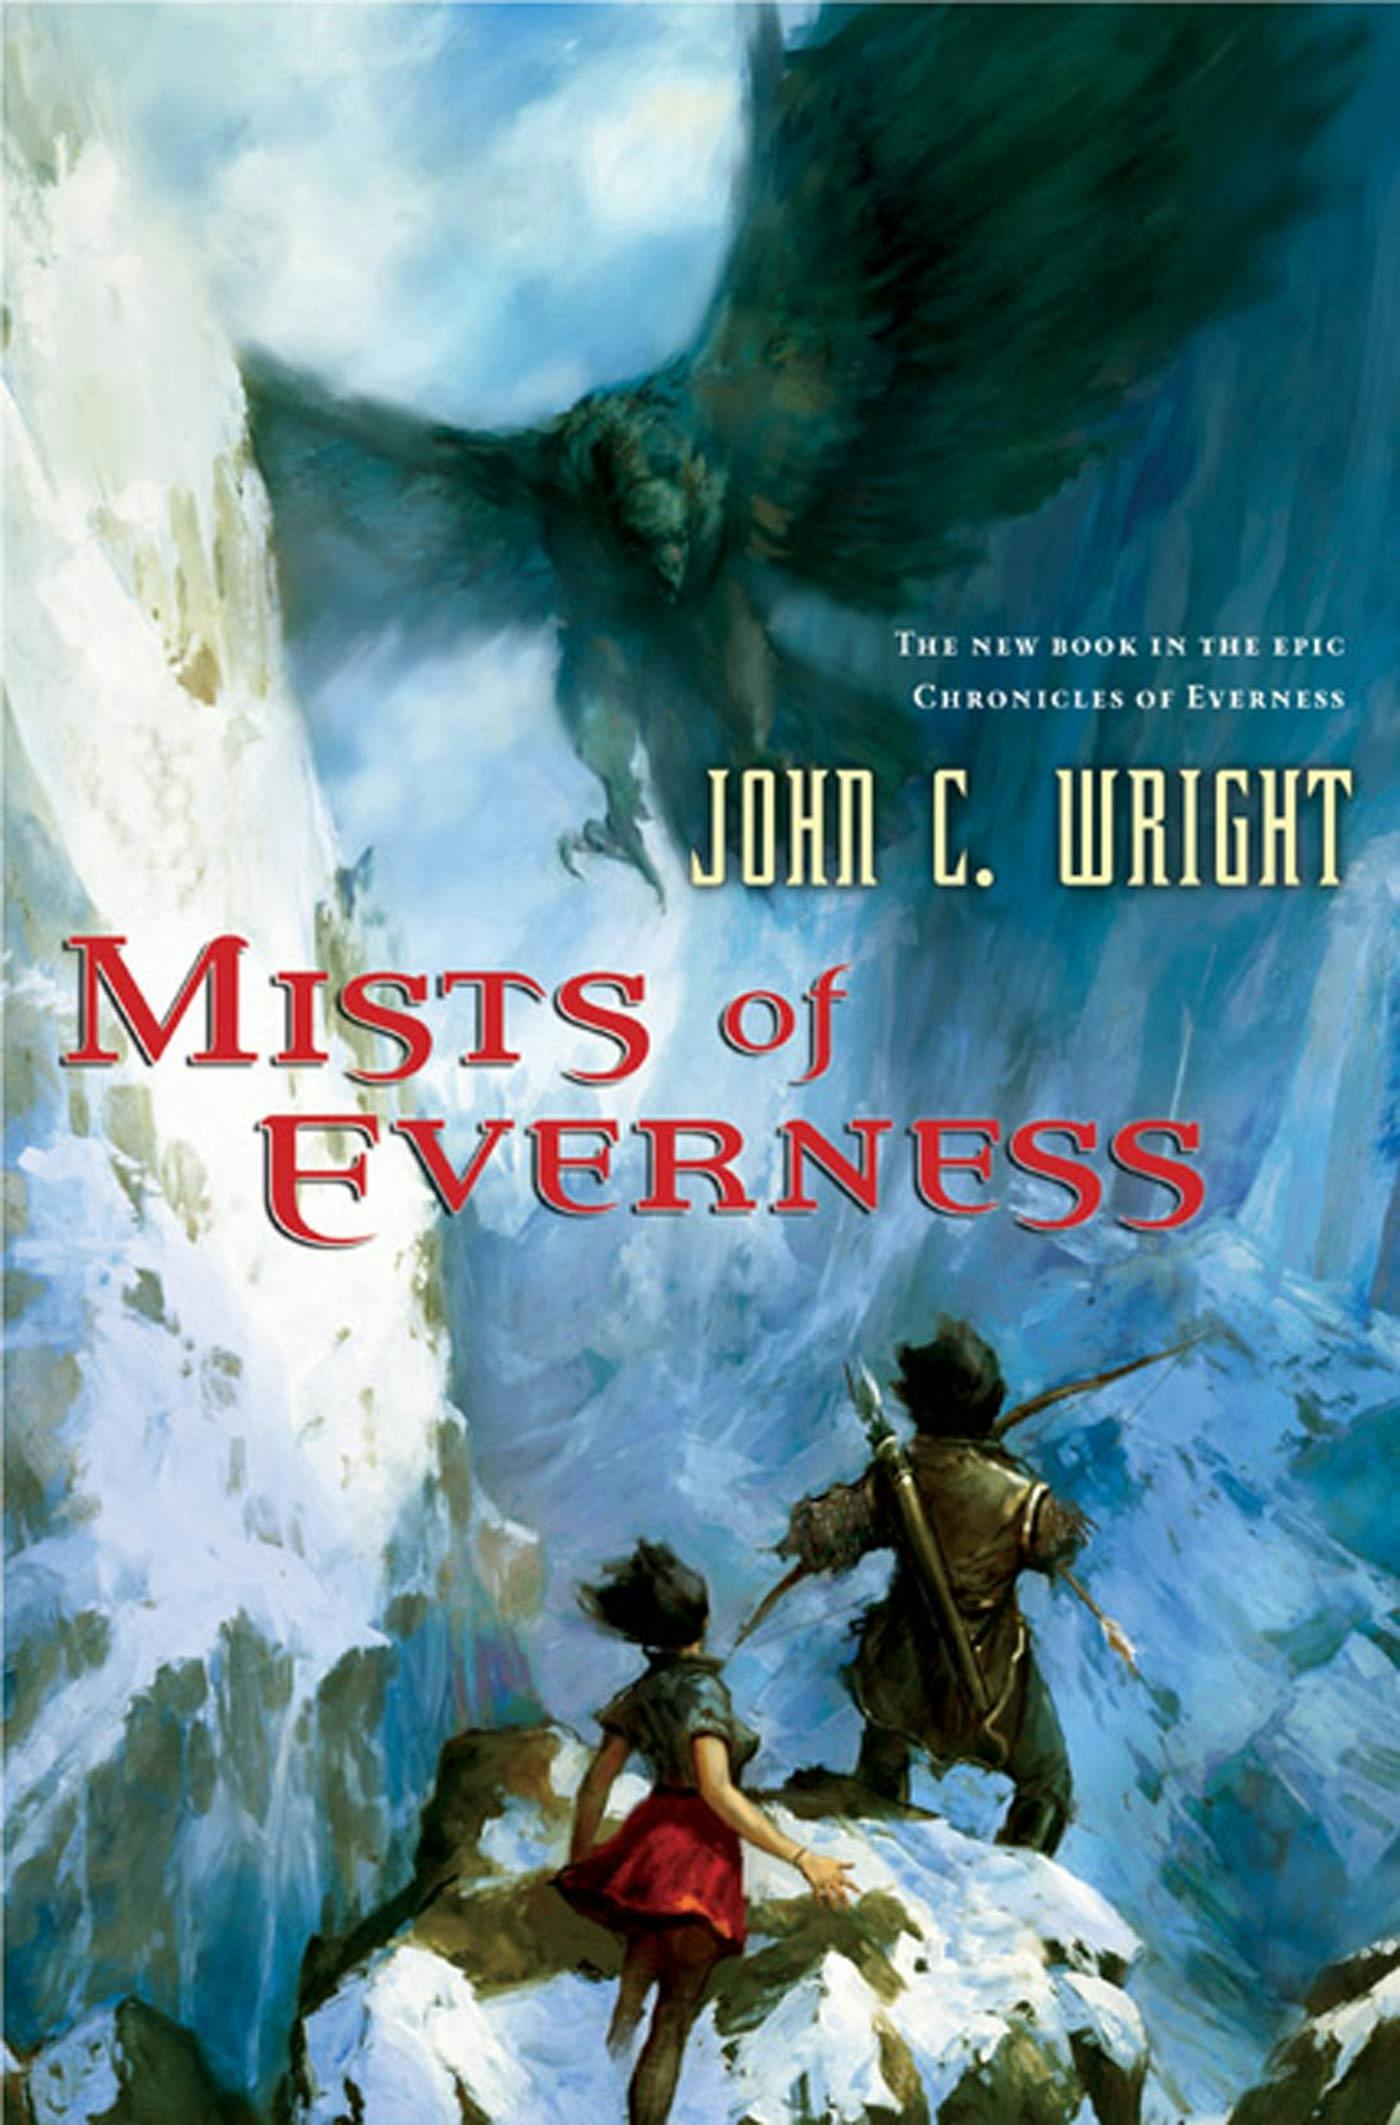 Cover for the book titled as: Mists of Everness